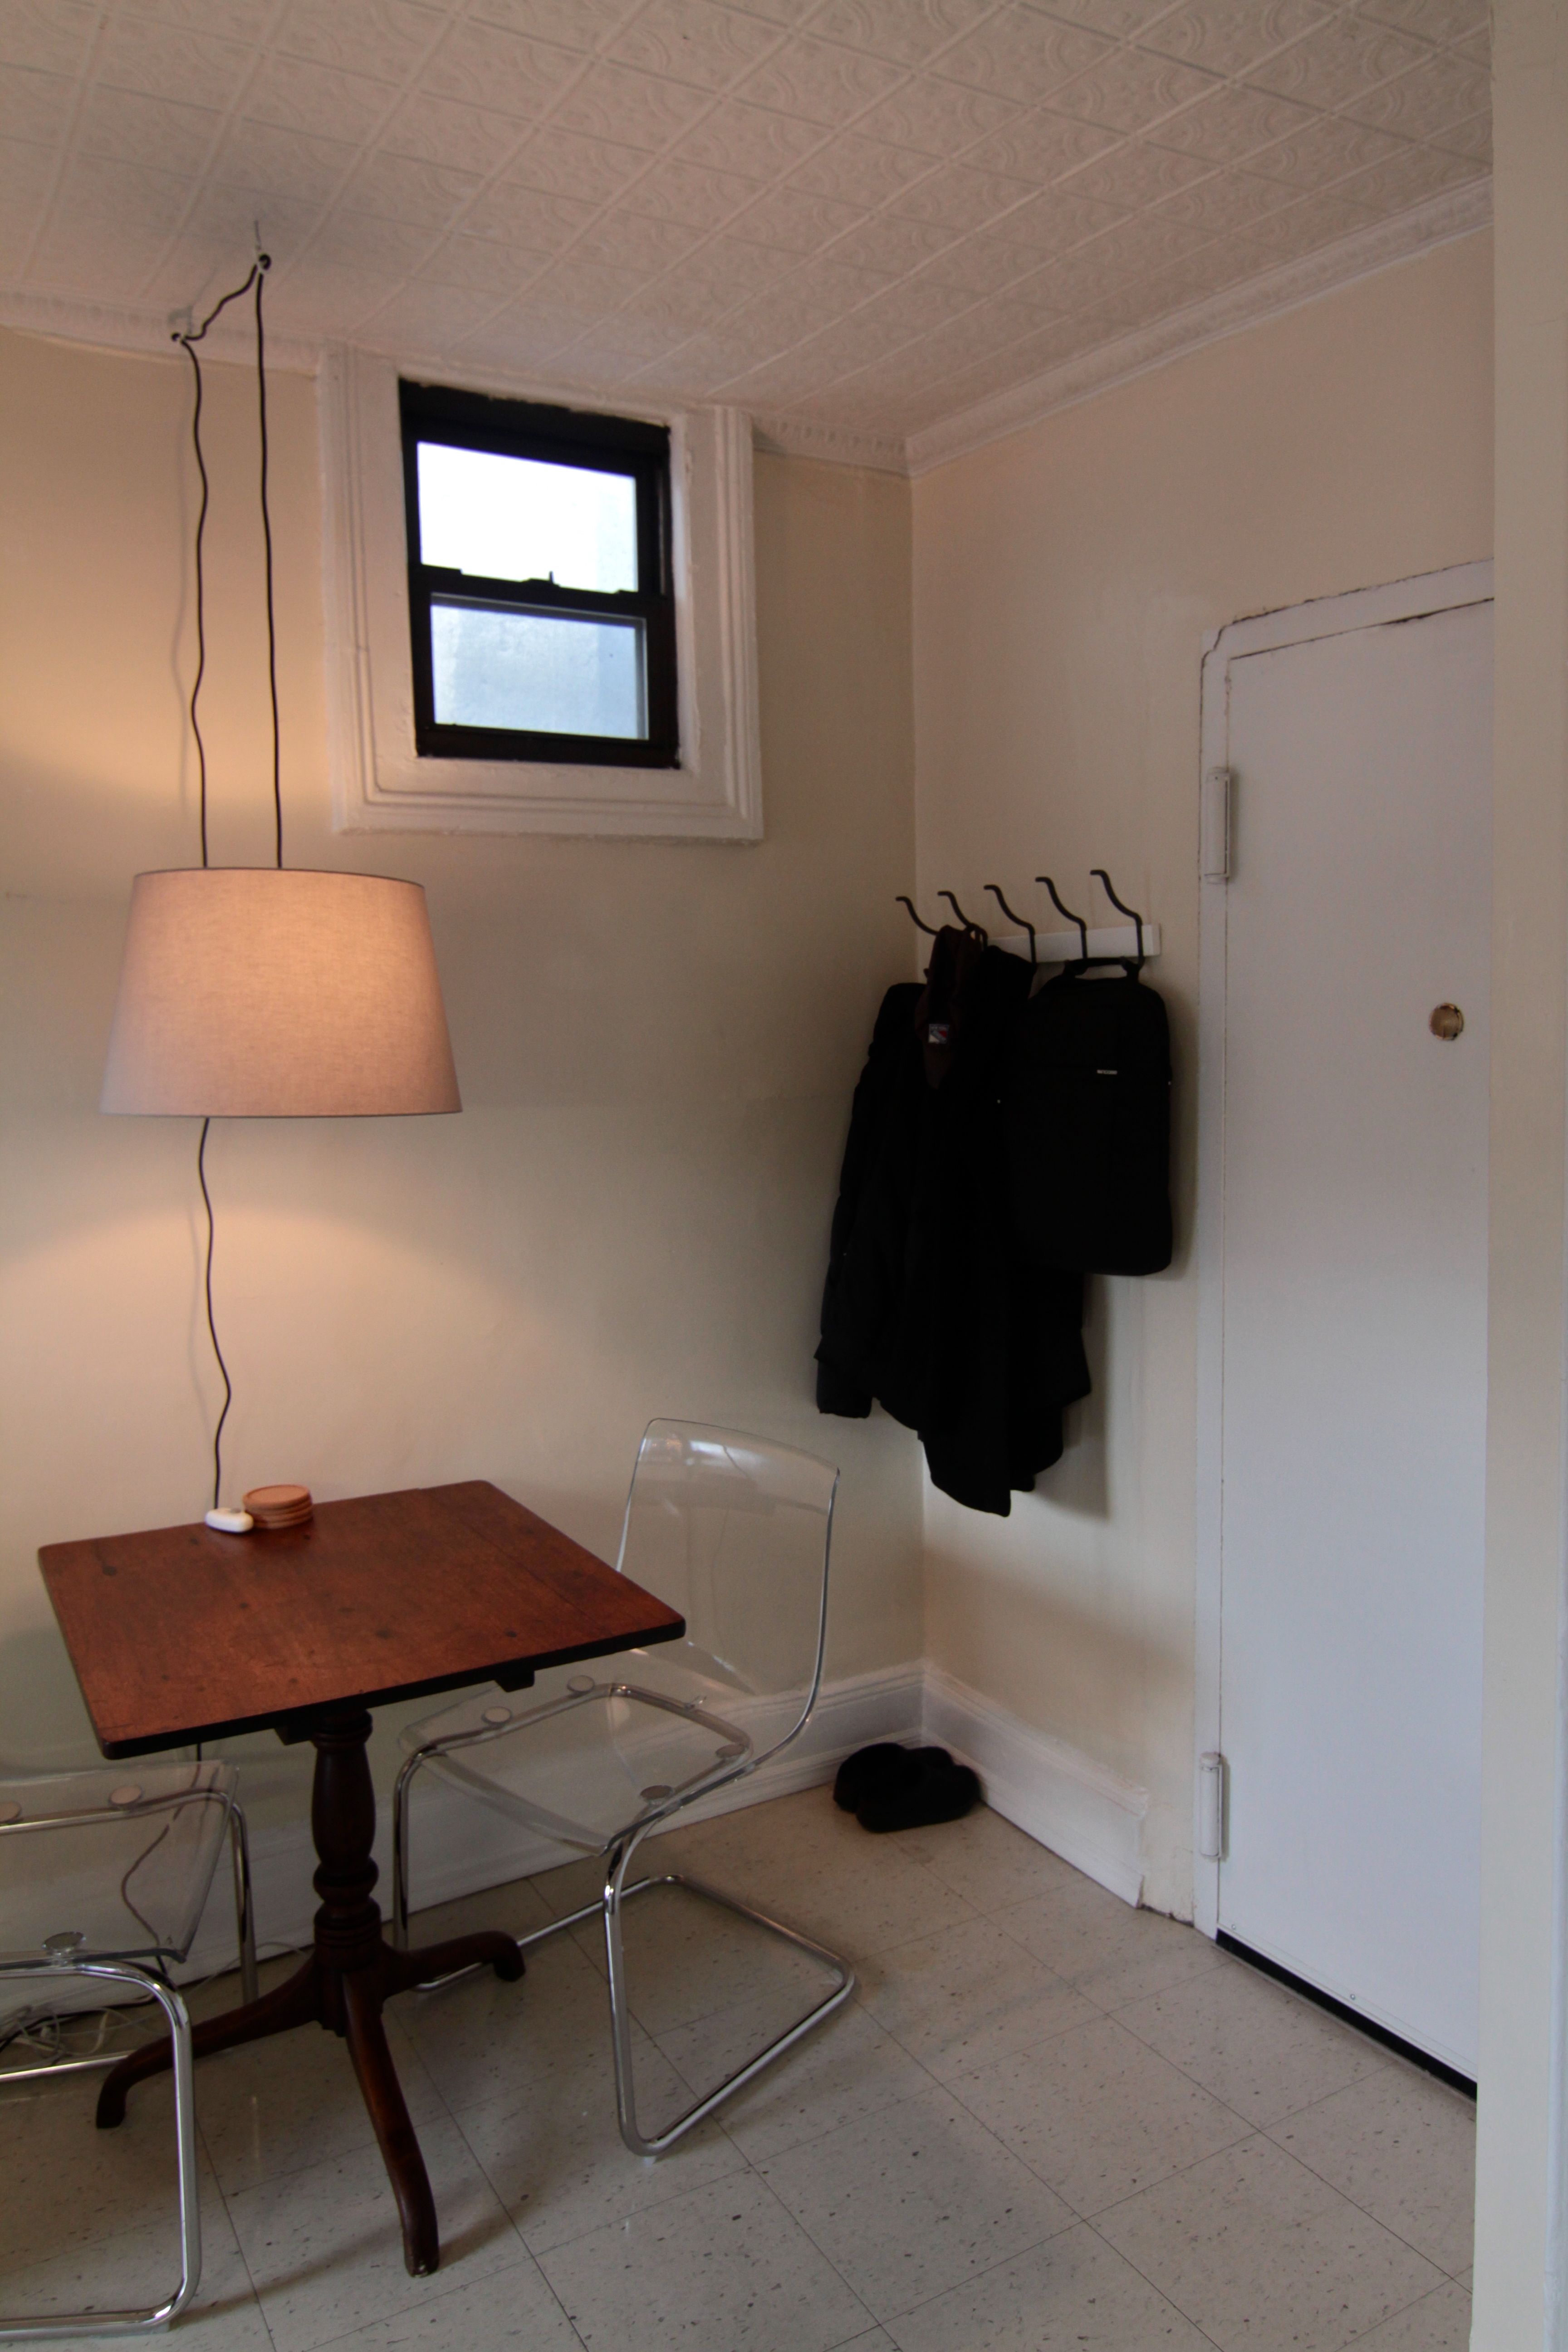 We added a coat rack to create an entry (and to give us a place to hang our coats). This little window lets in a bit of light, and a breeze in warmer months.